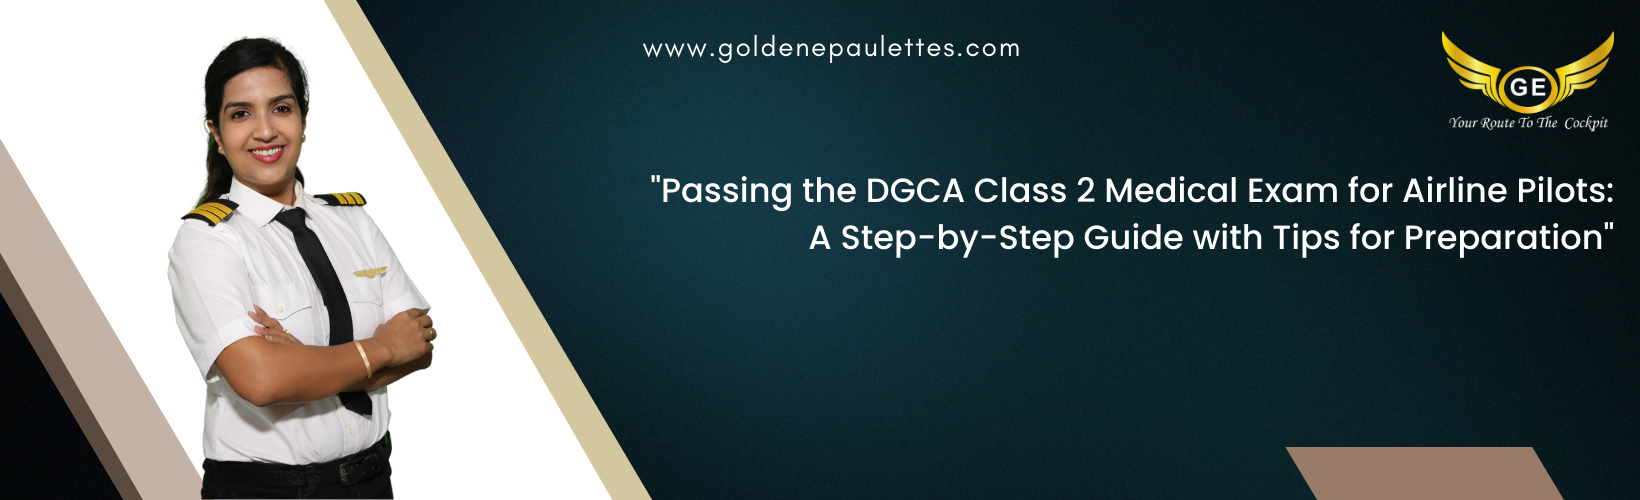 How to Pass the DGCA Class 2 Medical Exam for Airline Pilots - This article will provide a step-by-step guide to passing the DGCA Class 2 Medical Exam for Airline Pilots. It will also provide tips on how to prepare for the exam. (Reference